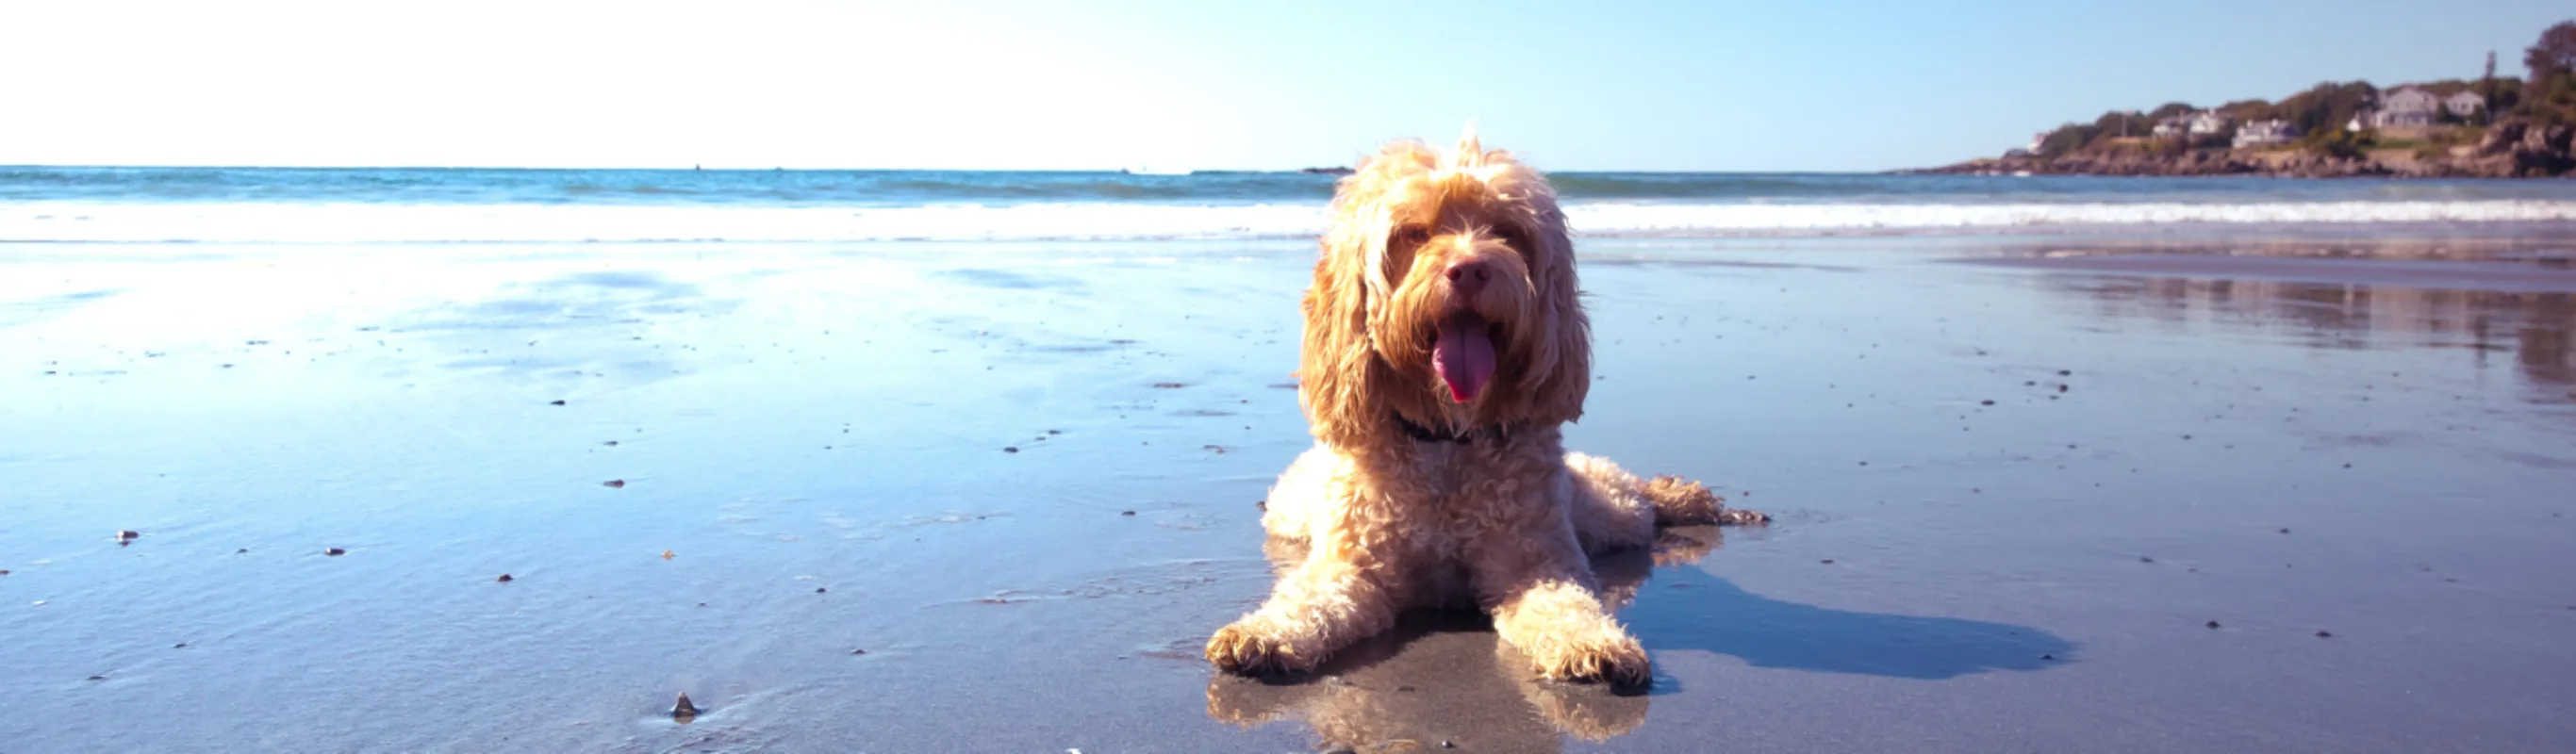 Goldendoodle sitting on beach